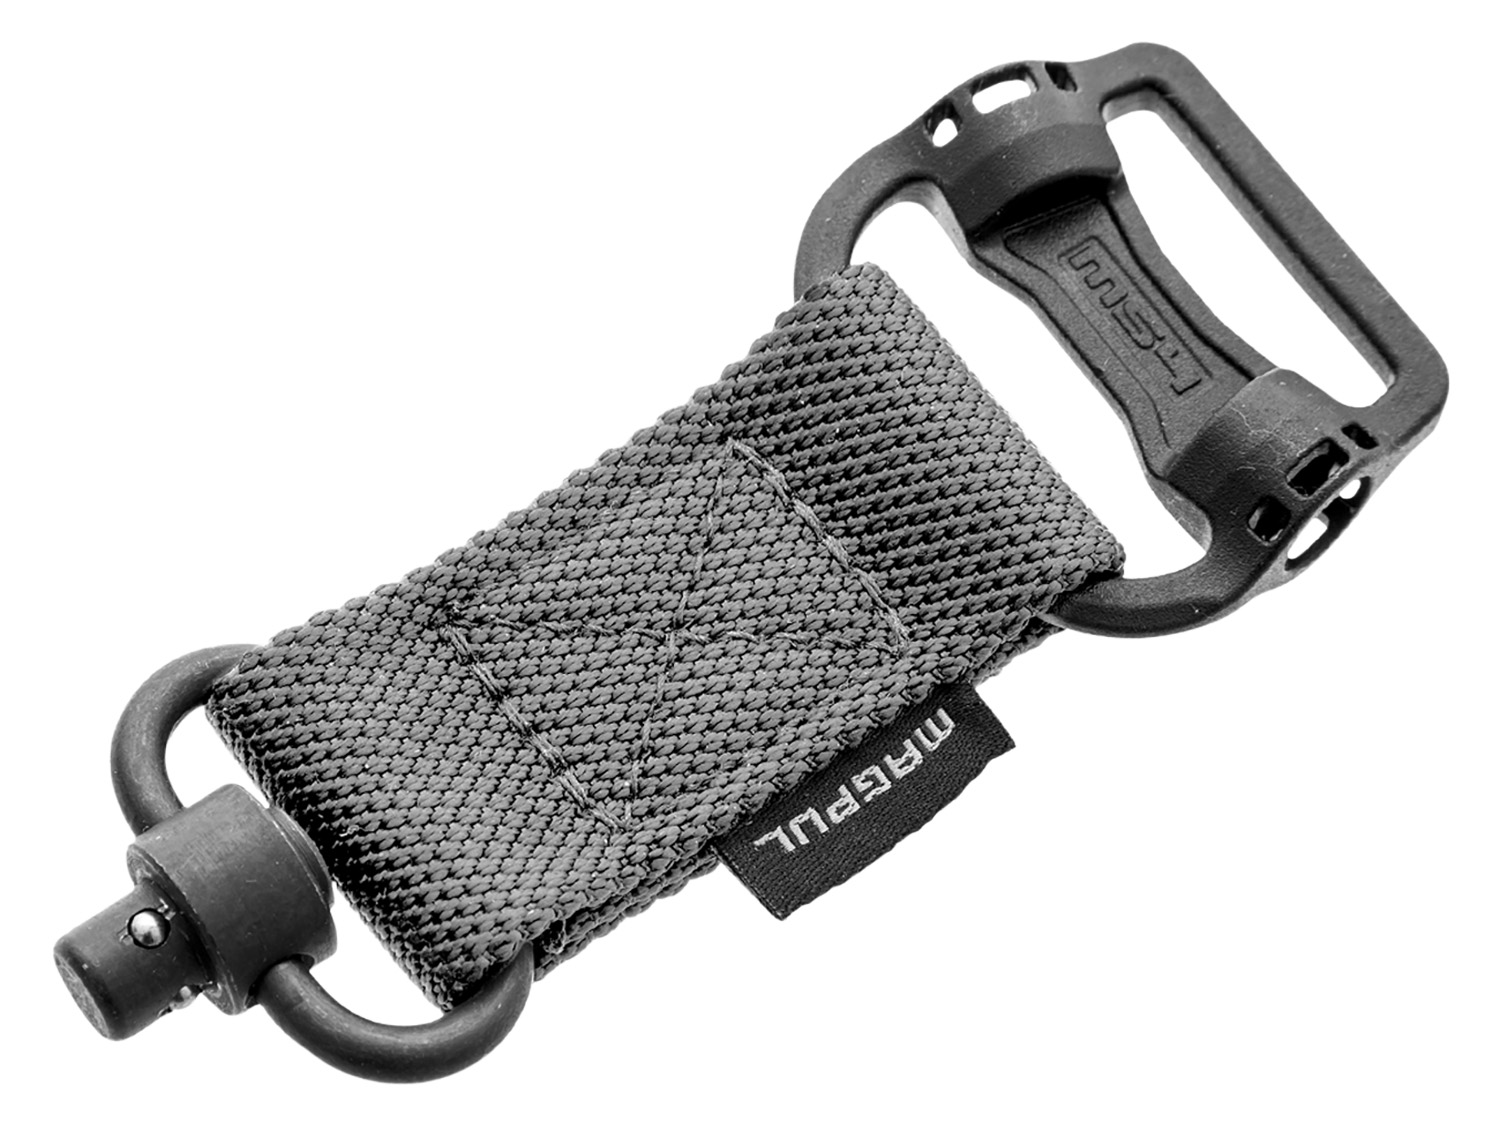 Magpul MAG519-GRY MS1/MS4 Sling Adapter made of Steel with Maganese Phosphate Stealth Gray Finish, Polymer Hardware, Nylon 1.25